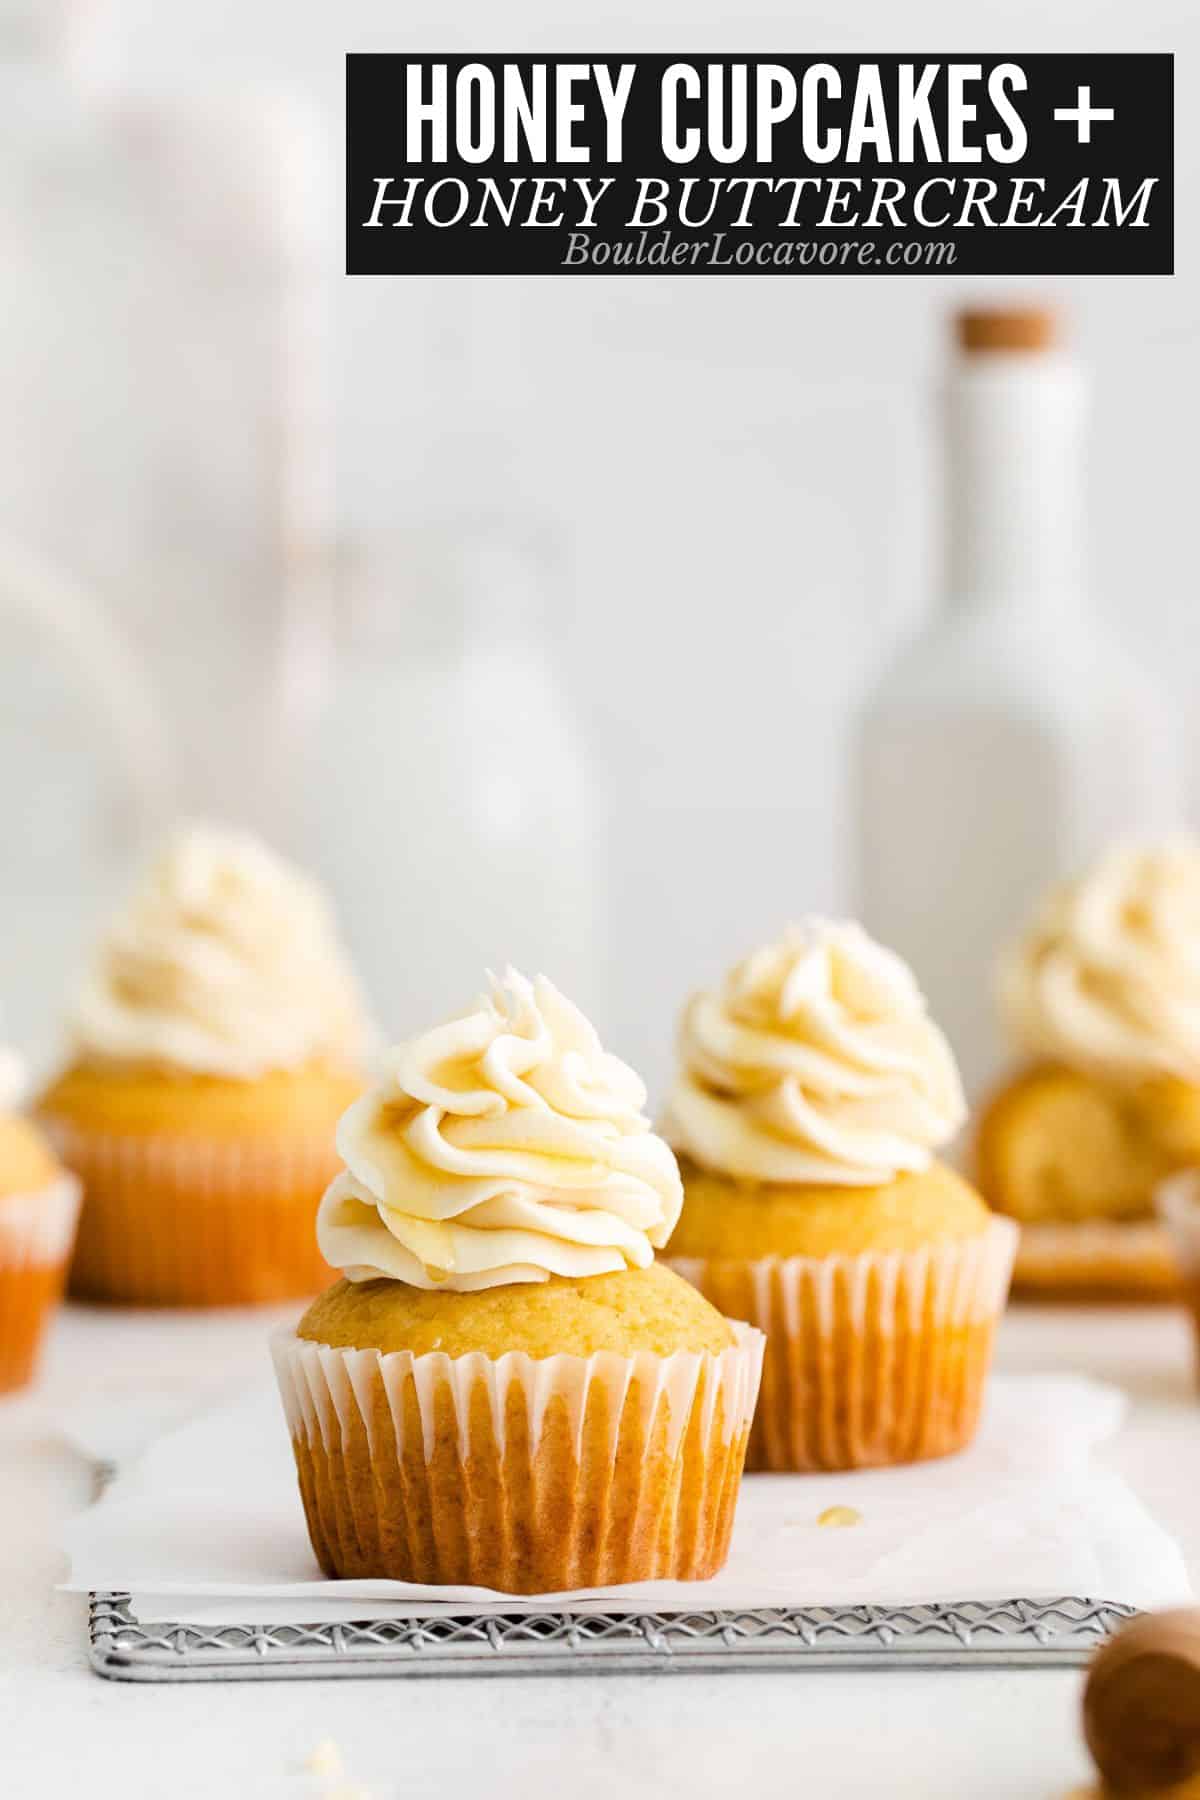 honey cupcakes with honey buttercream and text overlay.